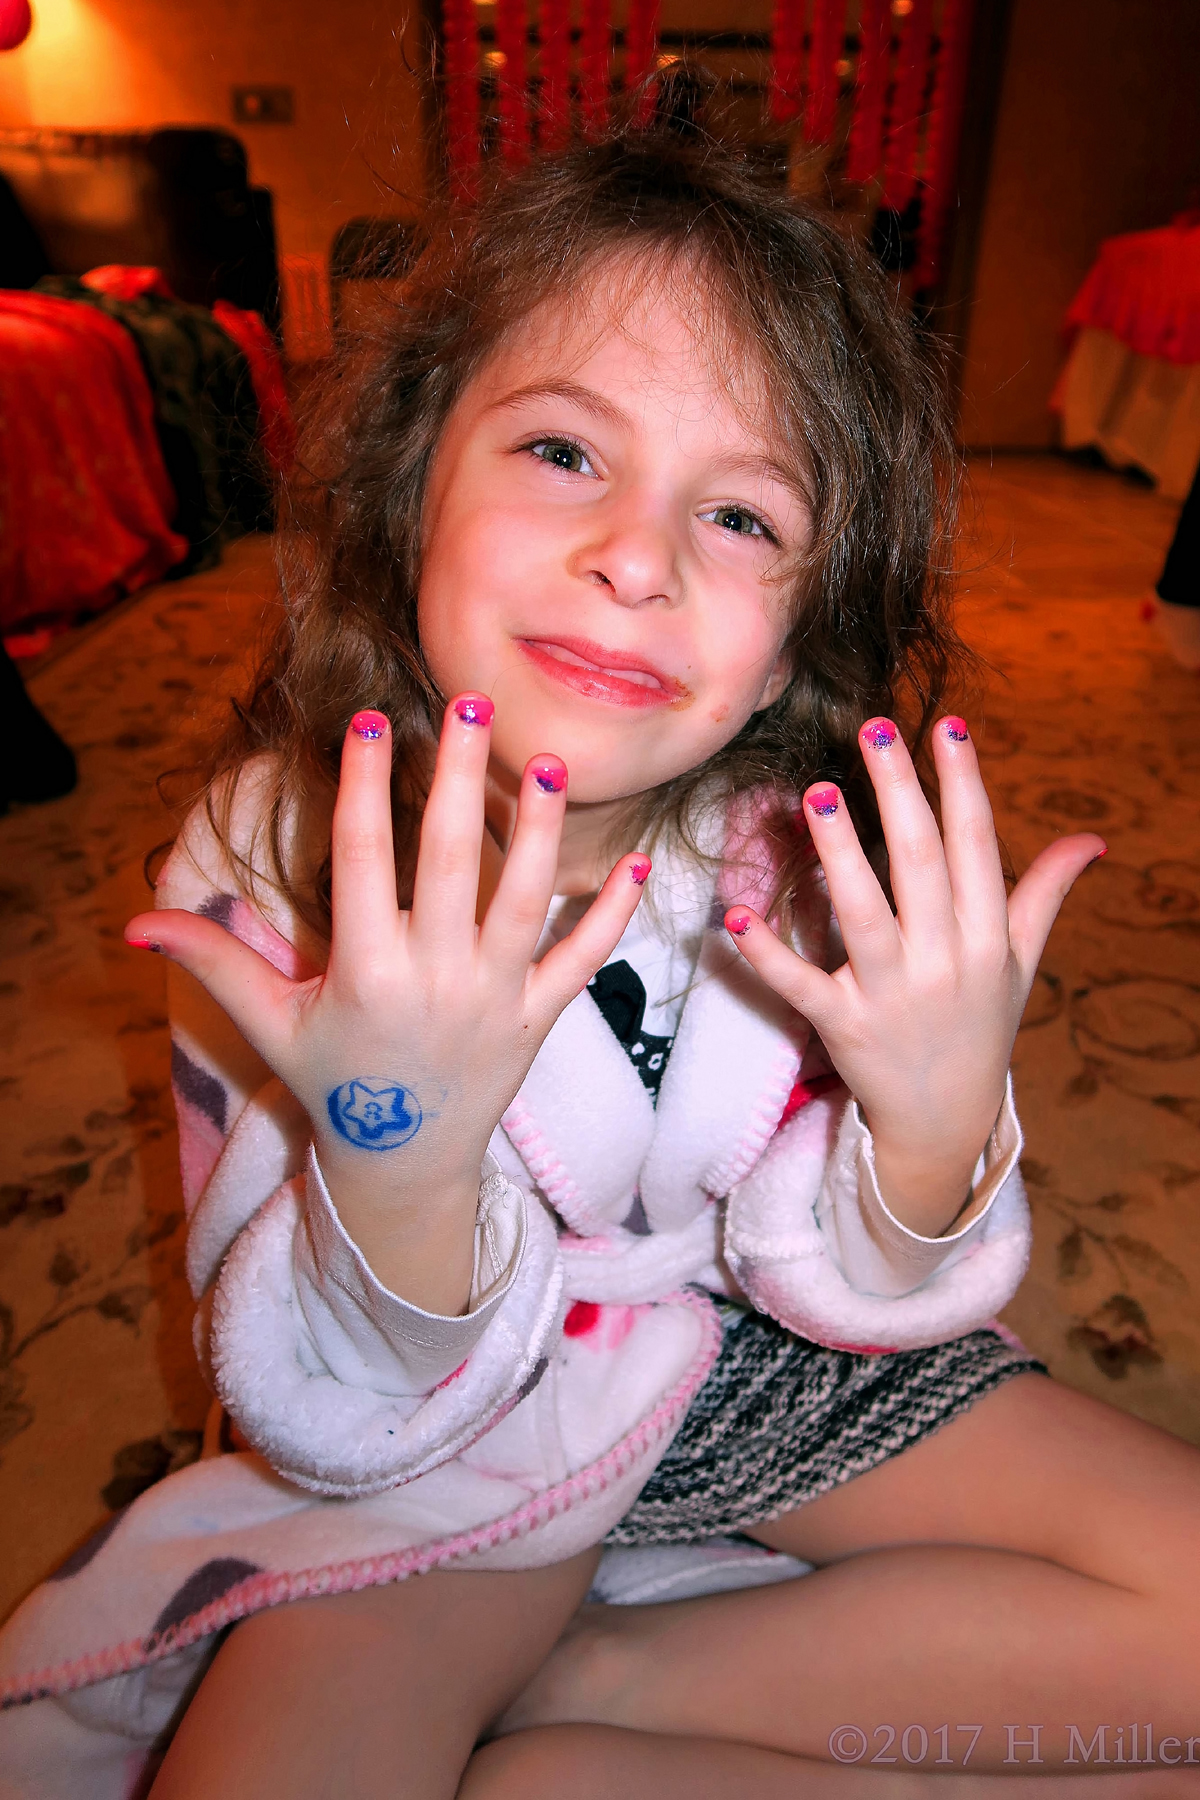 Cmiling With Her New Kids Manicure. 